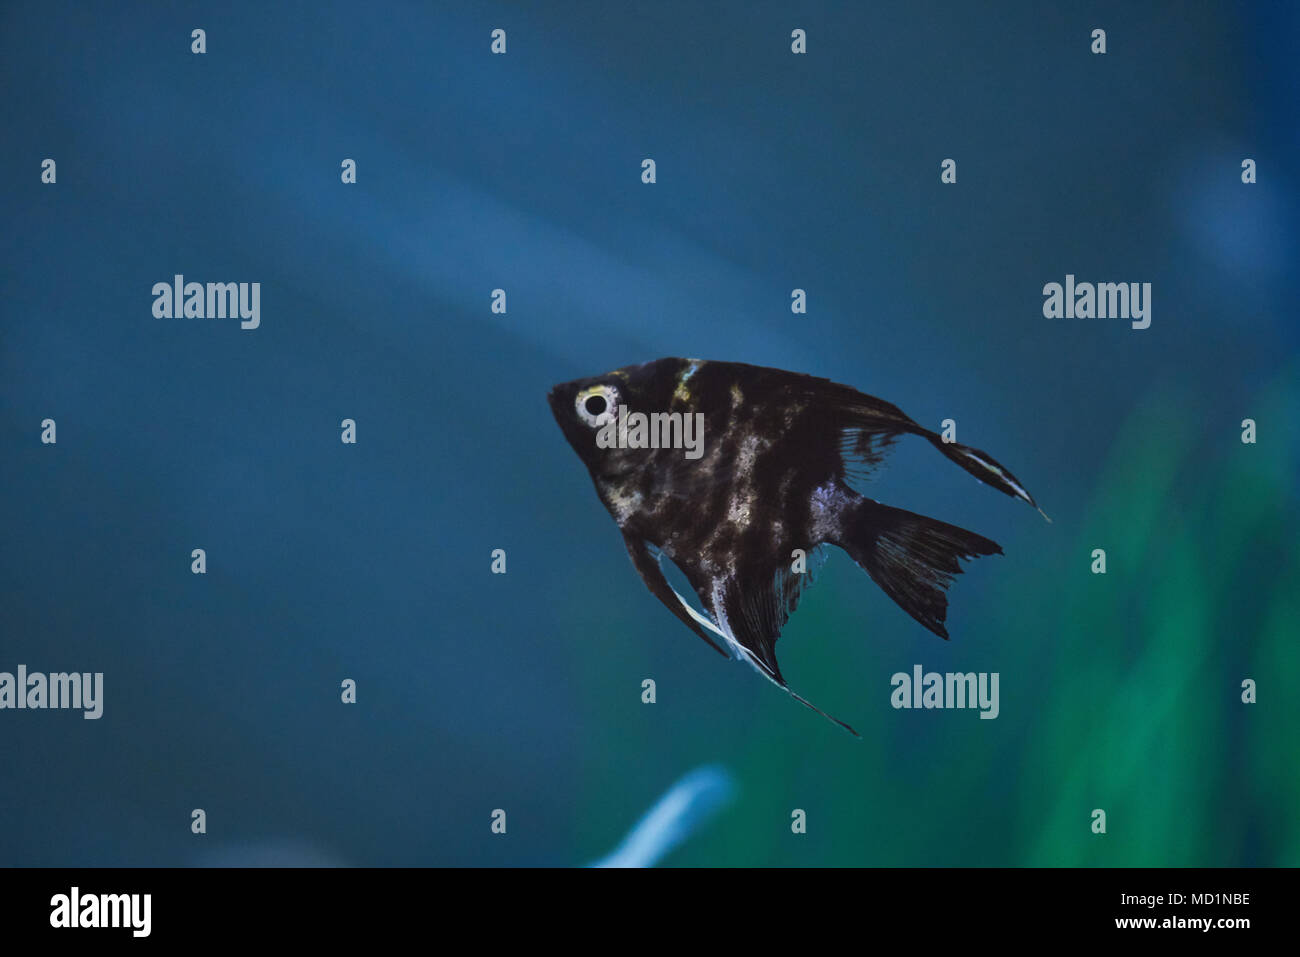 Black fish on blue aquarium water background with copy space Stock Photo